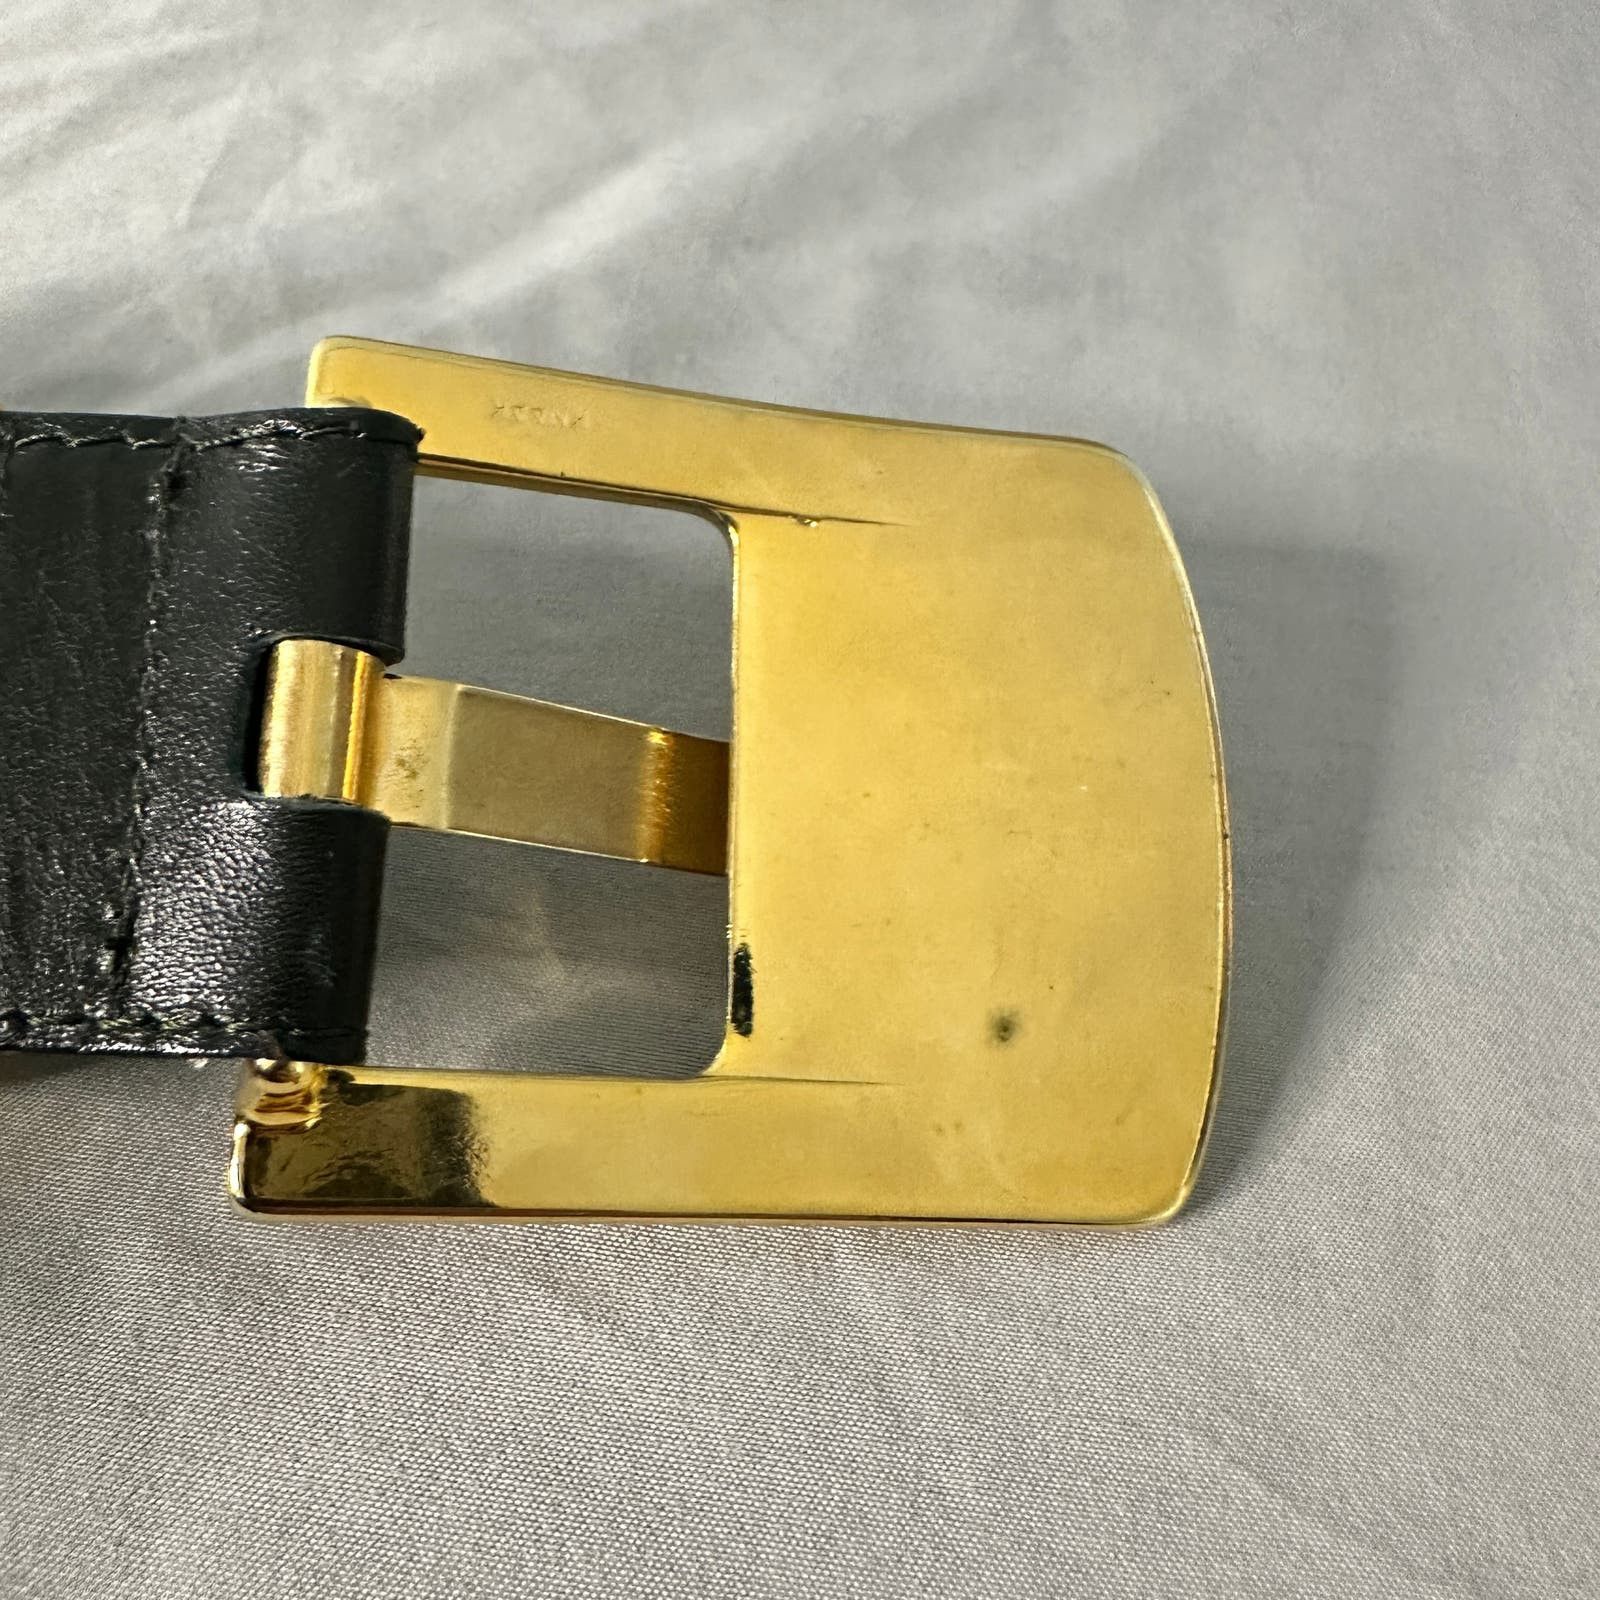 Escada Escada Vintage Motorcycle Collection Belt Size 40 Size ONE SIZE - 7 Preview